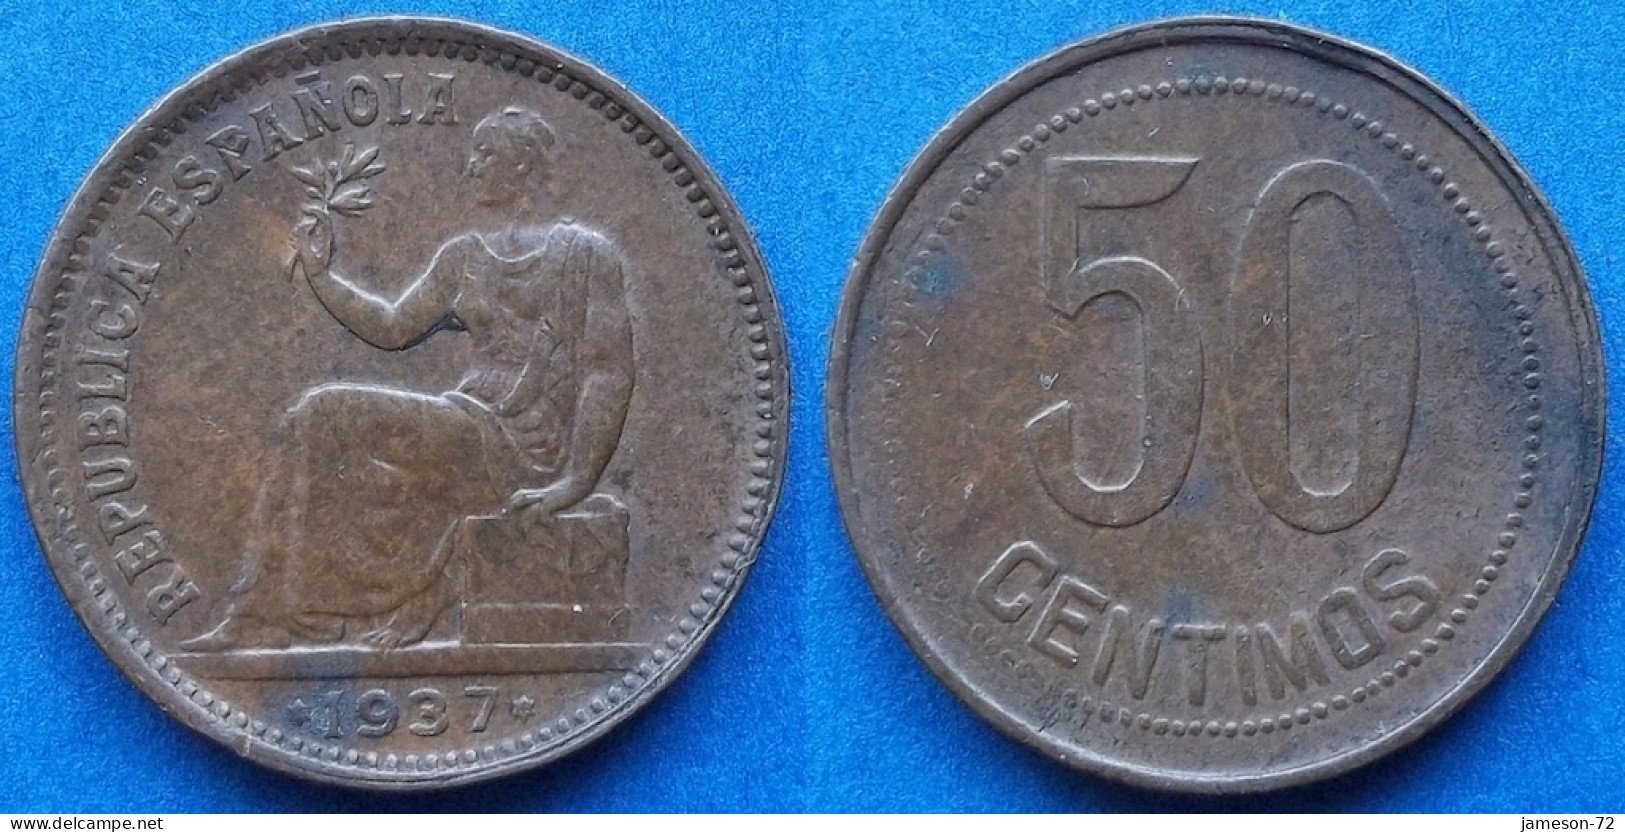 SPAIN - 50 Centimos 1937 *3 *7 "Seated Hispania Left Holding Sprig" KM# 754.1 II Republic (1931-1939) - Edelweiss Coins - 50 Centiemos